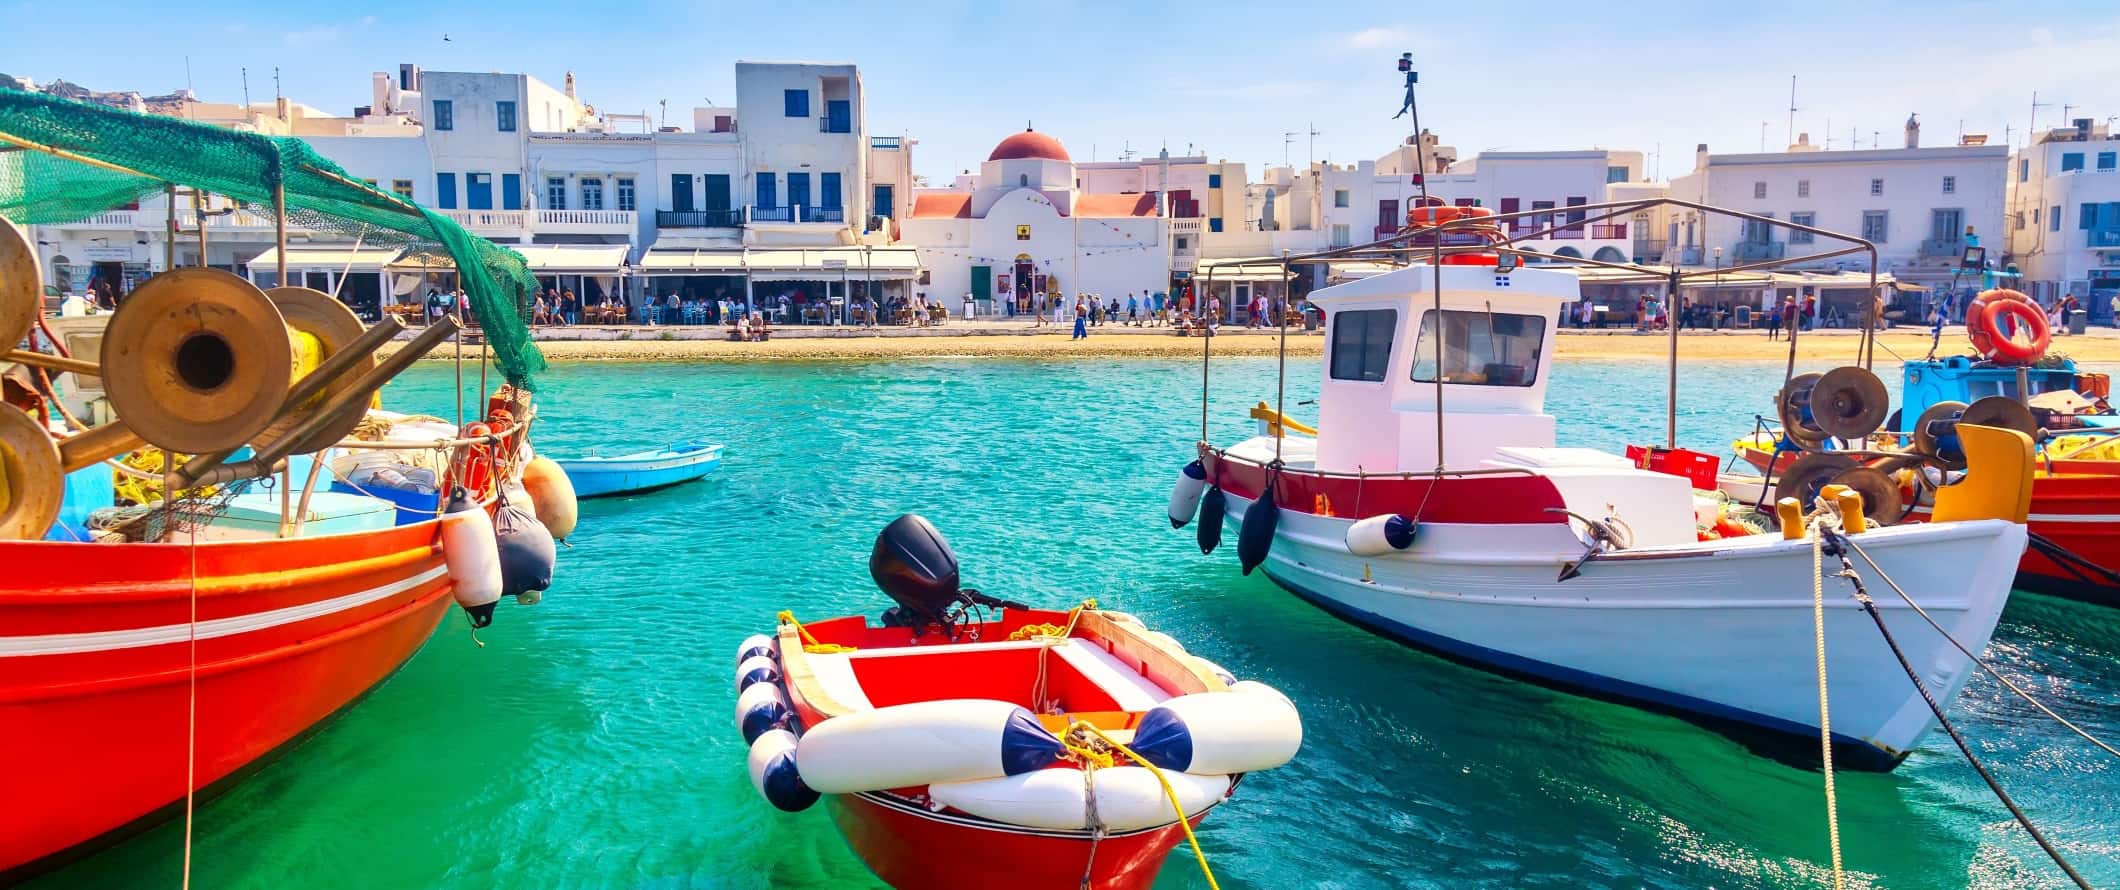 Brightly colored boats in the old port of Chora on the island of Mykonos in Greece.